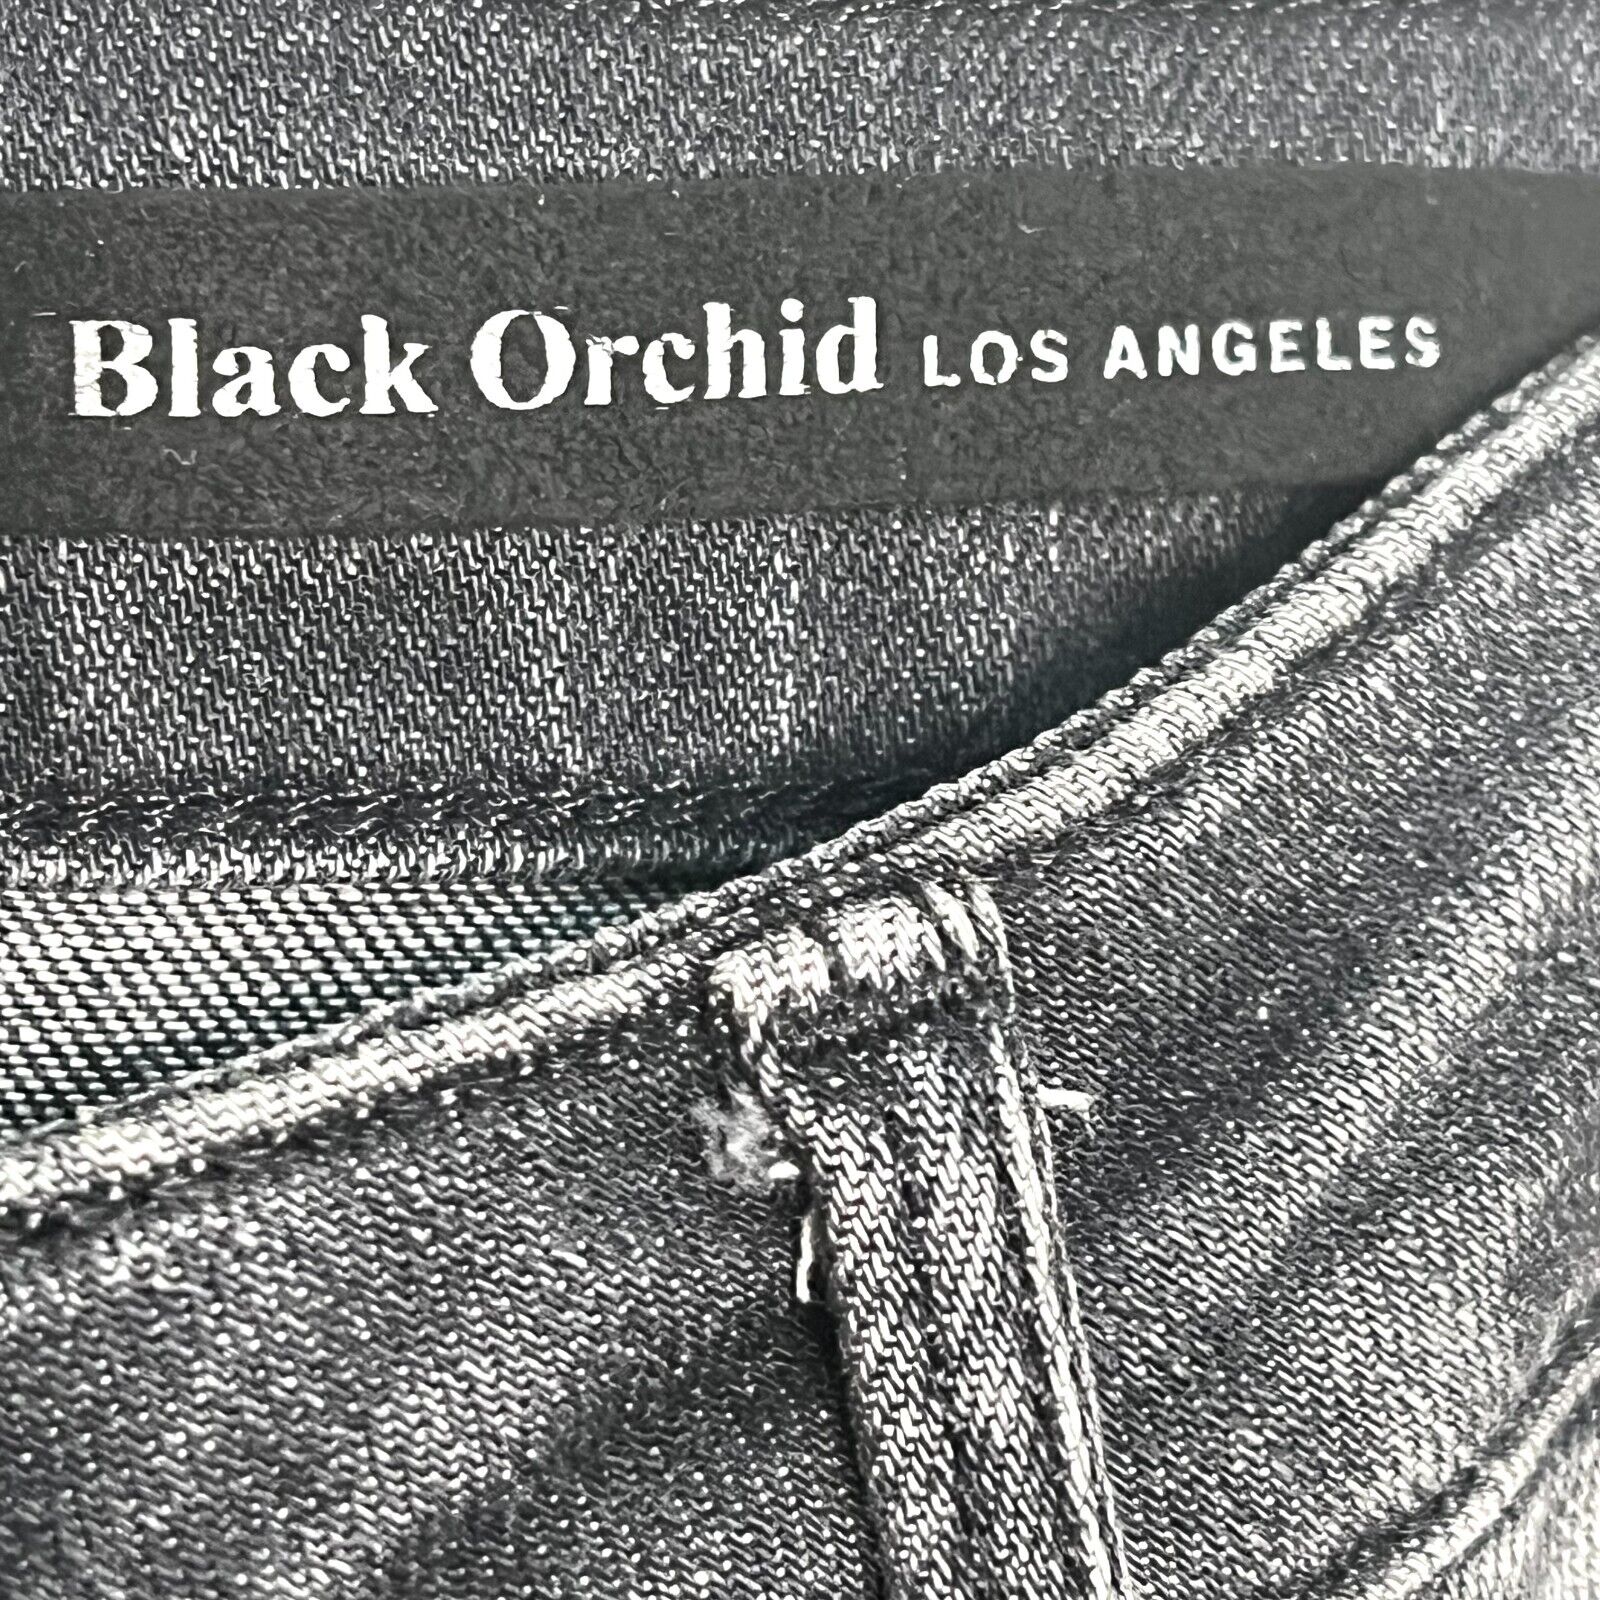 Black Orchid Black Pearl Skinny Boot Cut Distressed Jeans Size 28 NEW